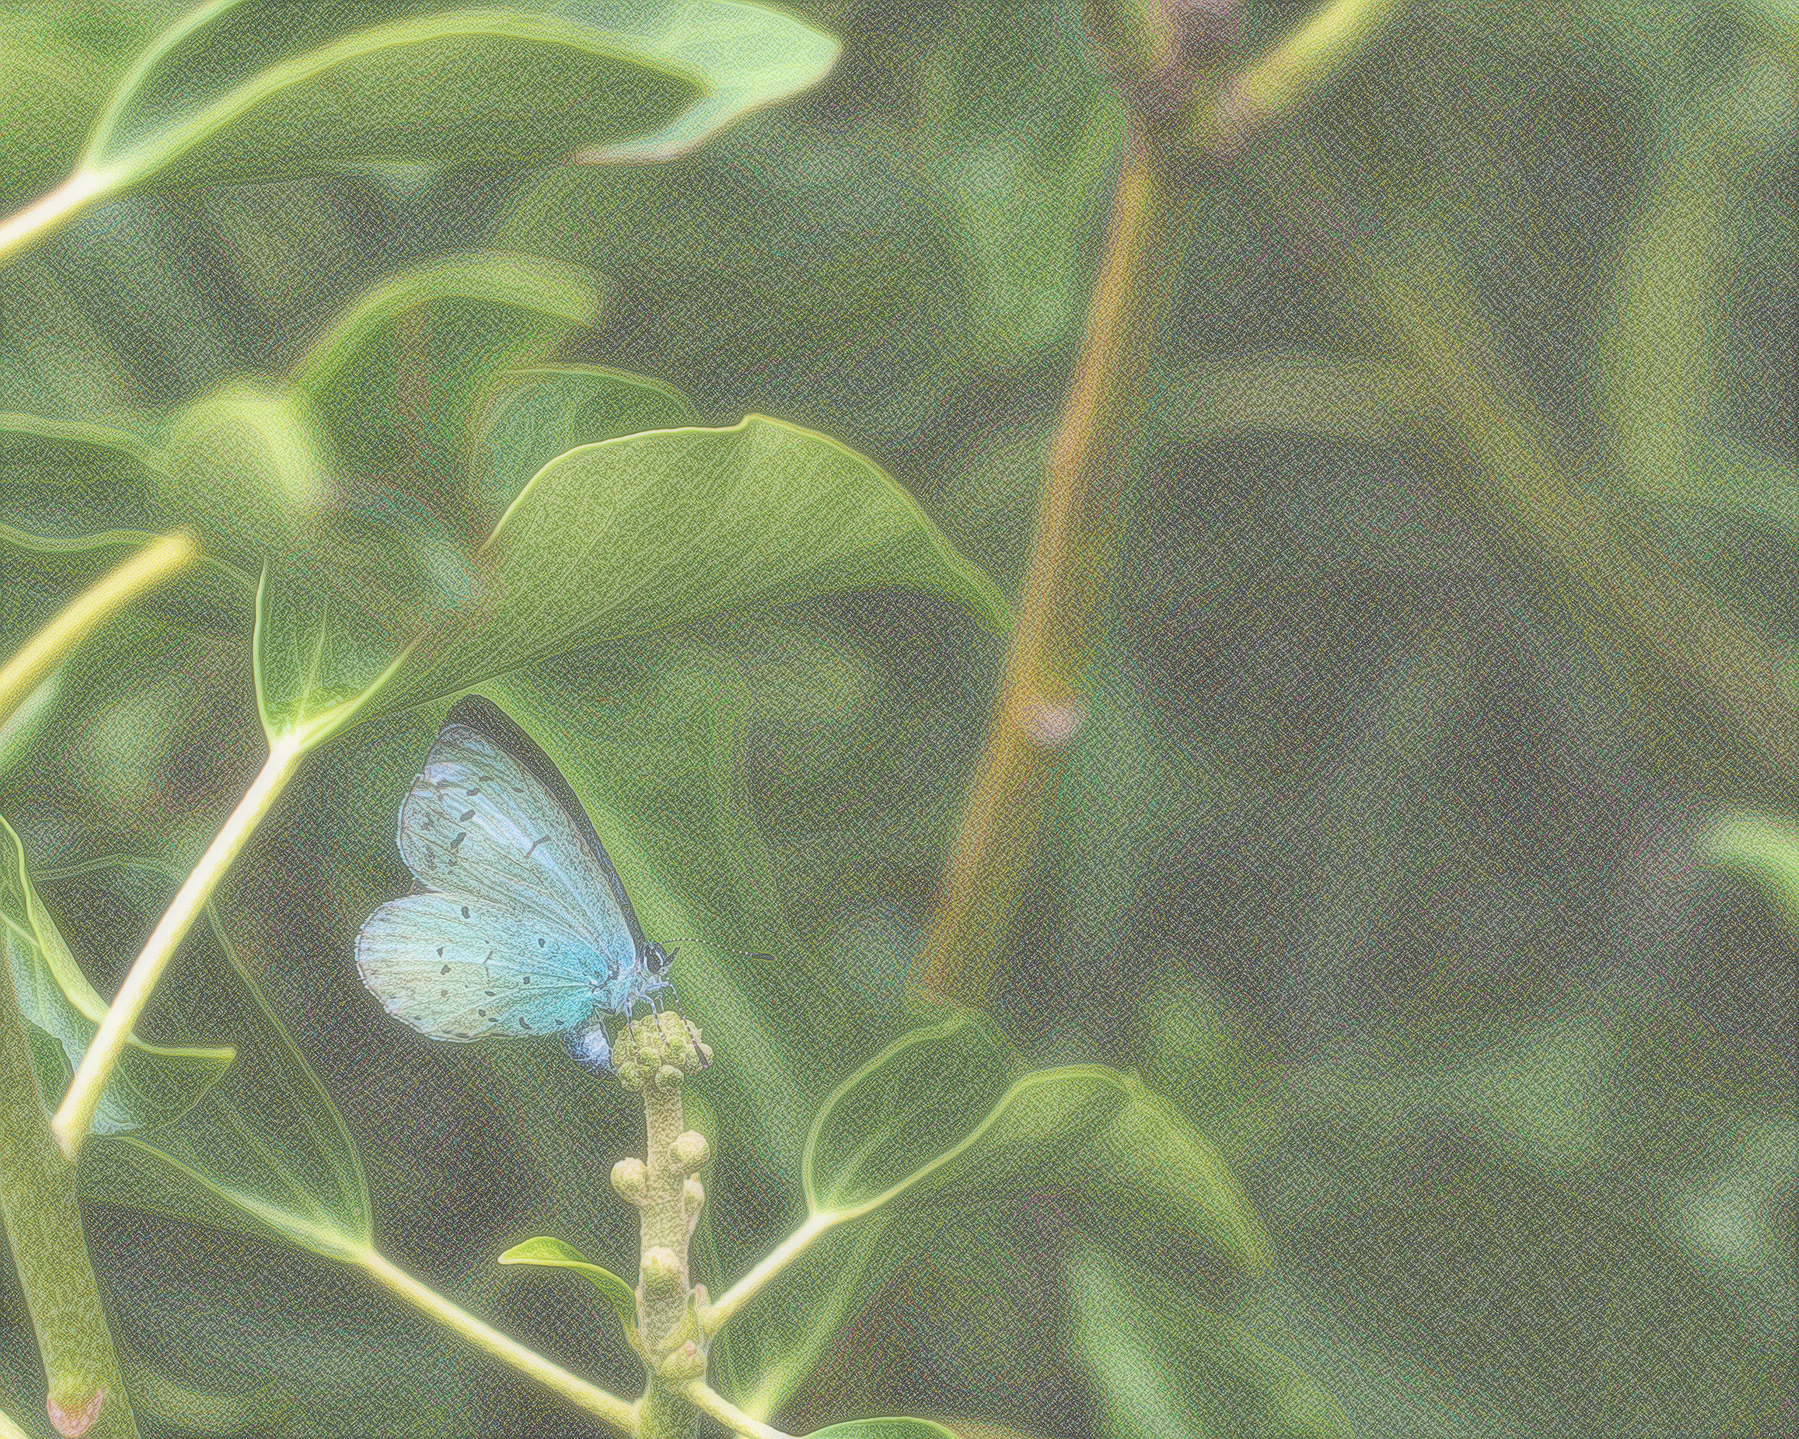 A photograph of a pale blue butterfly against green leaves, passed through a filter to give it an almost painted look